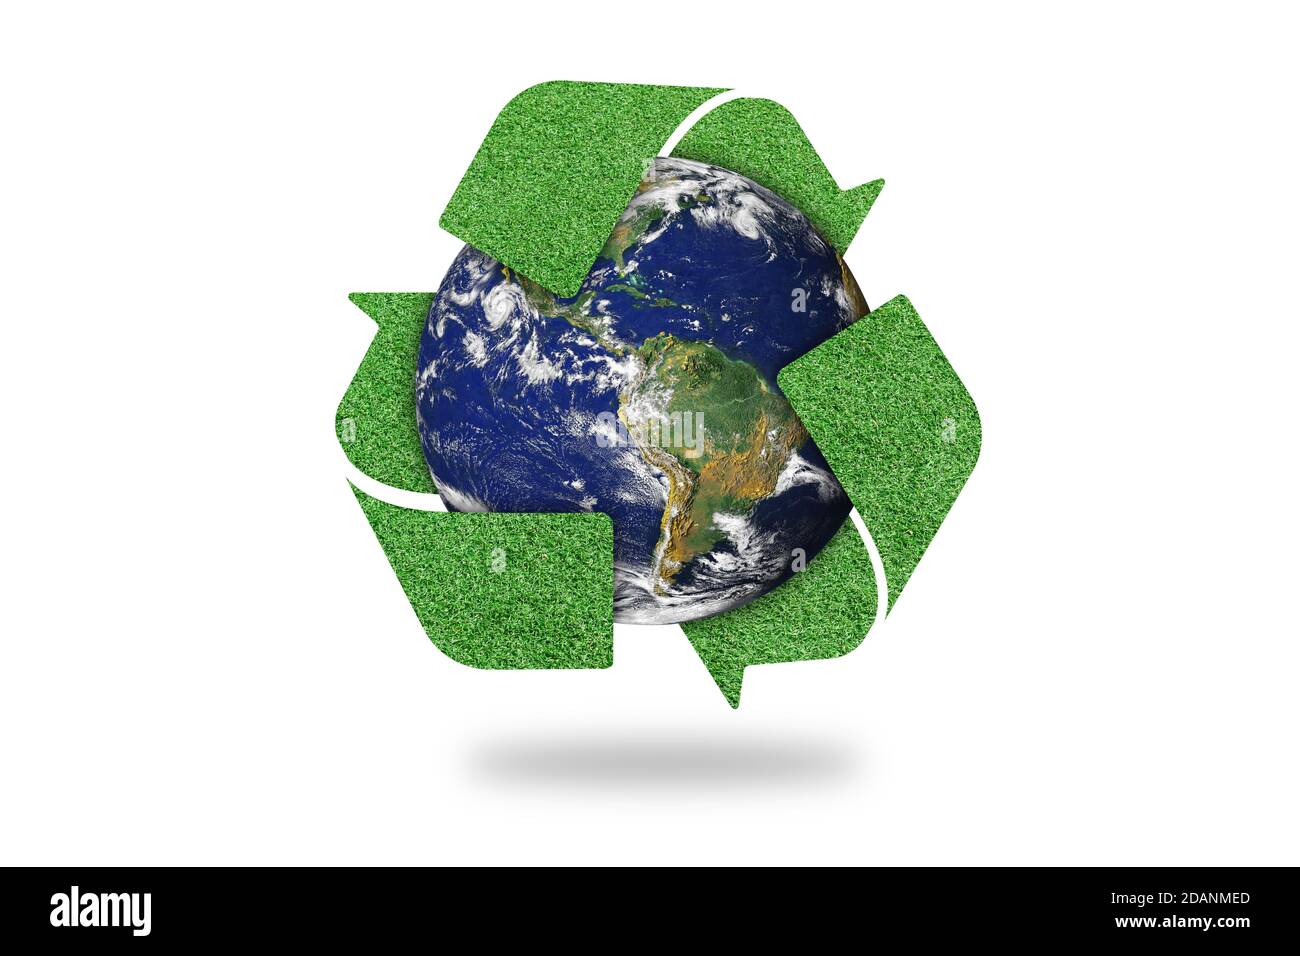 Recycle symbol logo and earth isolated on white background. Environment concept. Elements of this image furnished by NASA. Stock Photo